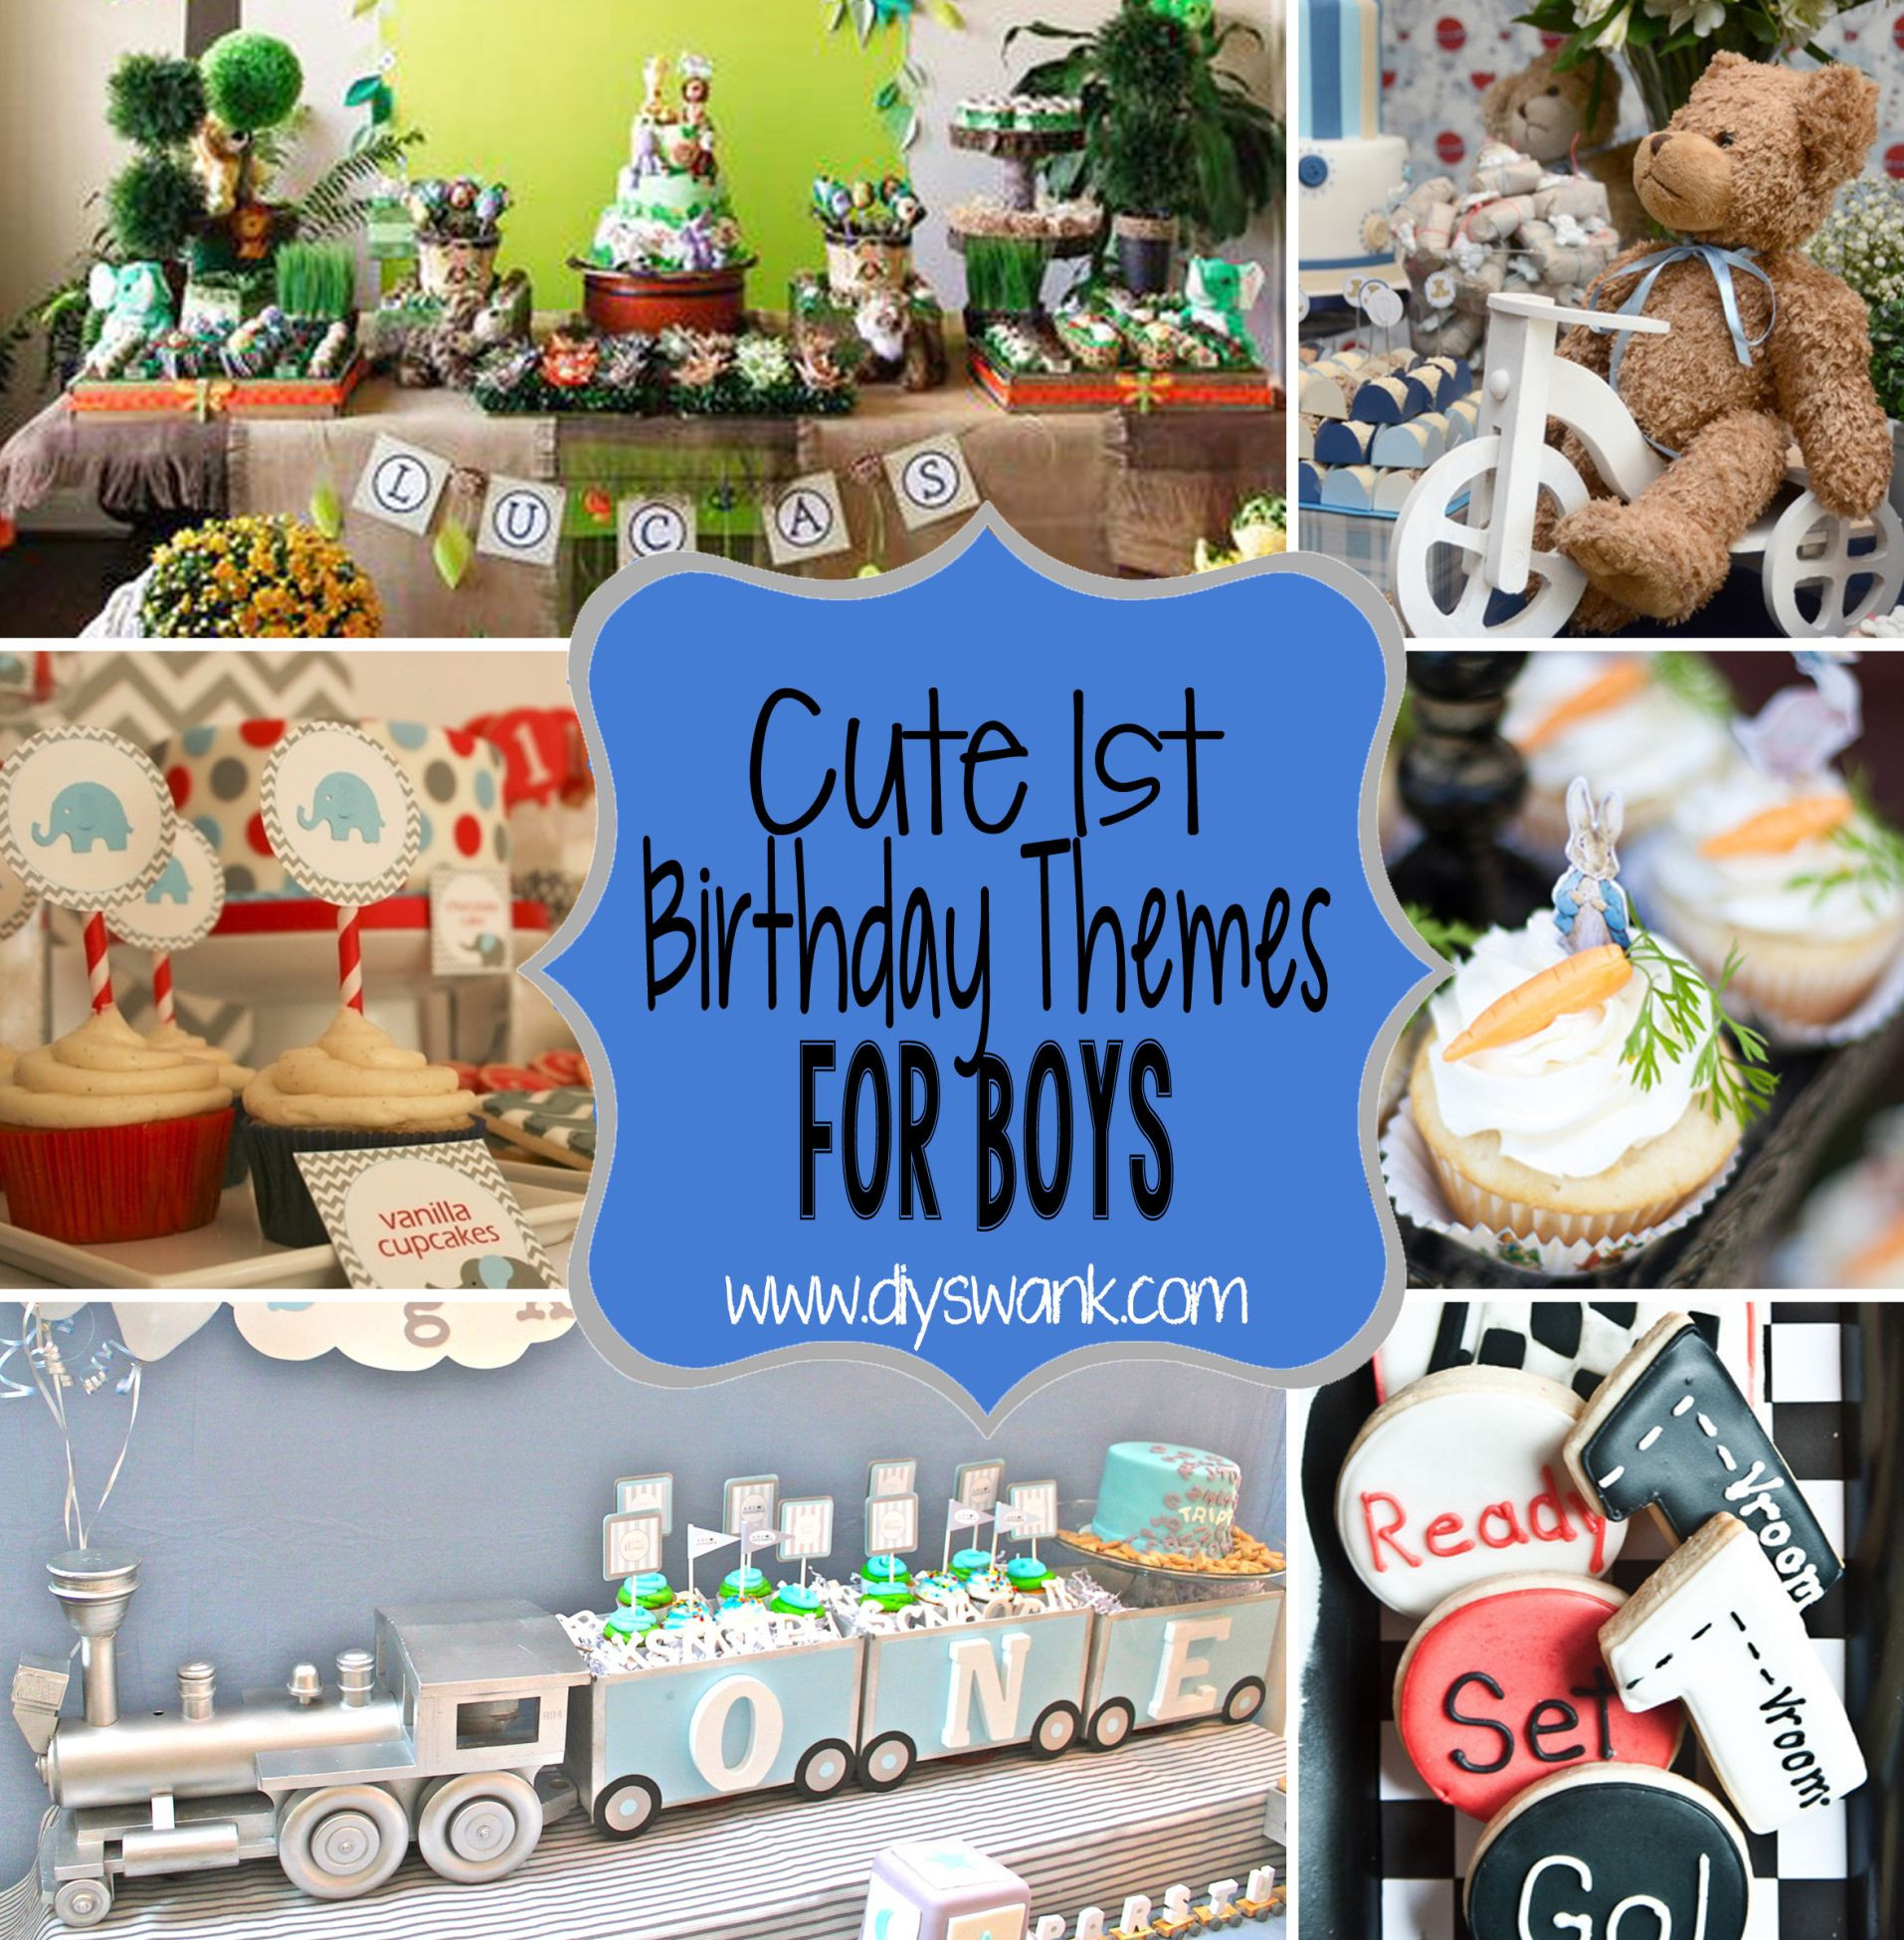 1st Birthday Gifts For Boy
 Cute Boy 1st Birthday Party Themes With images